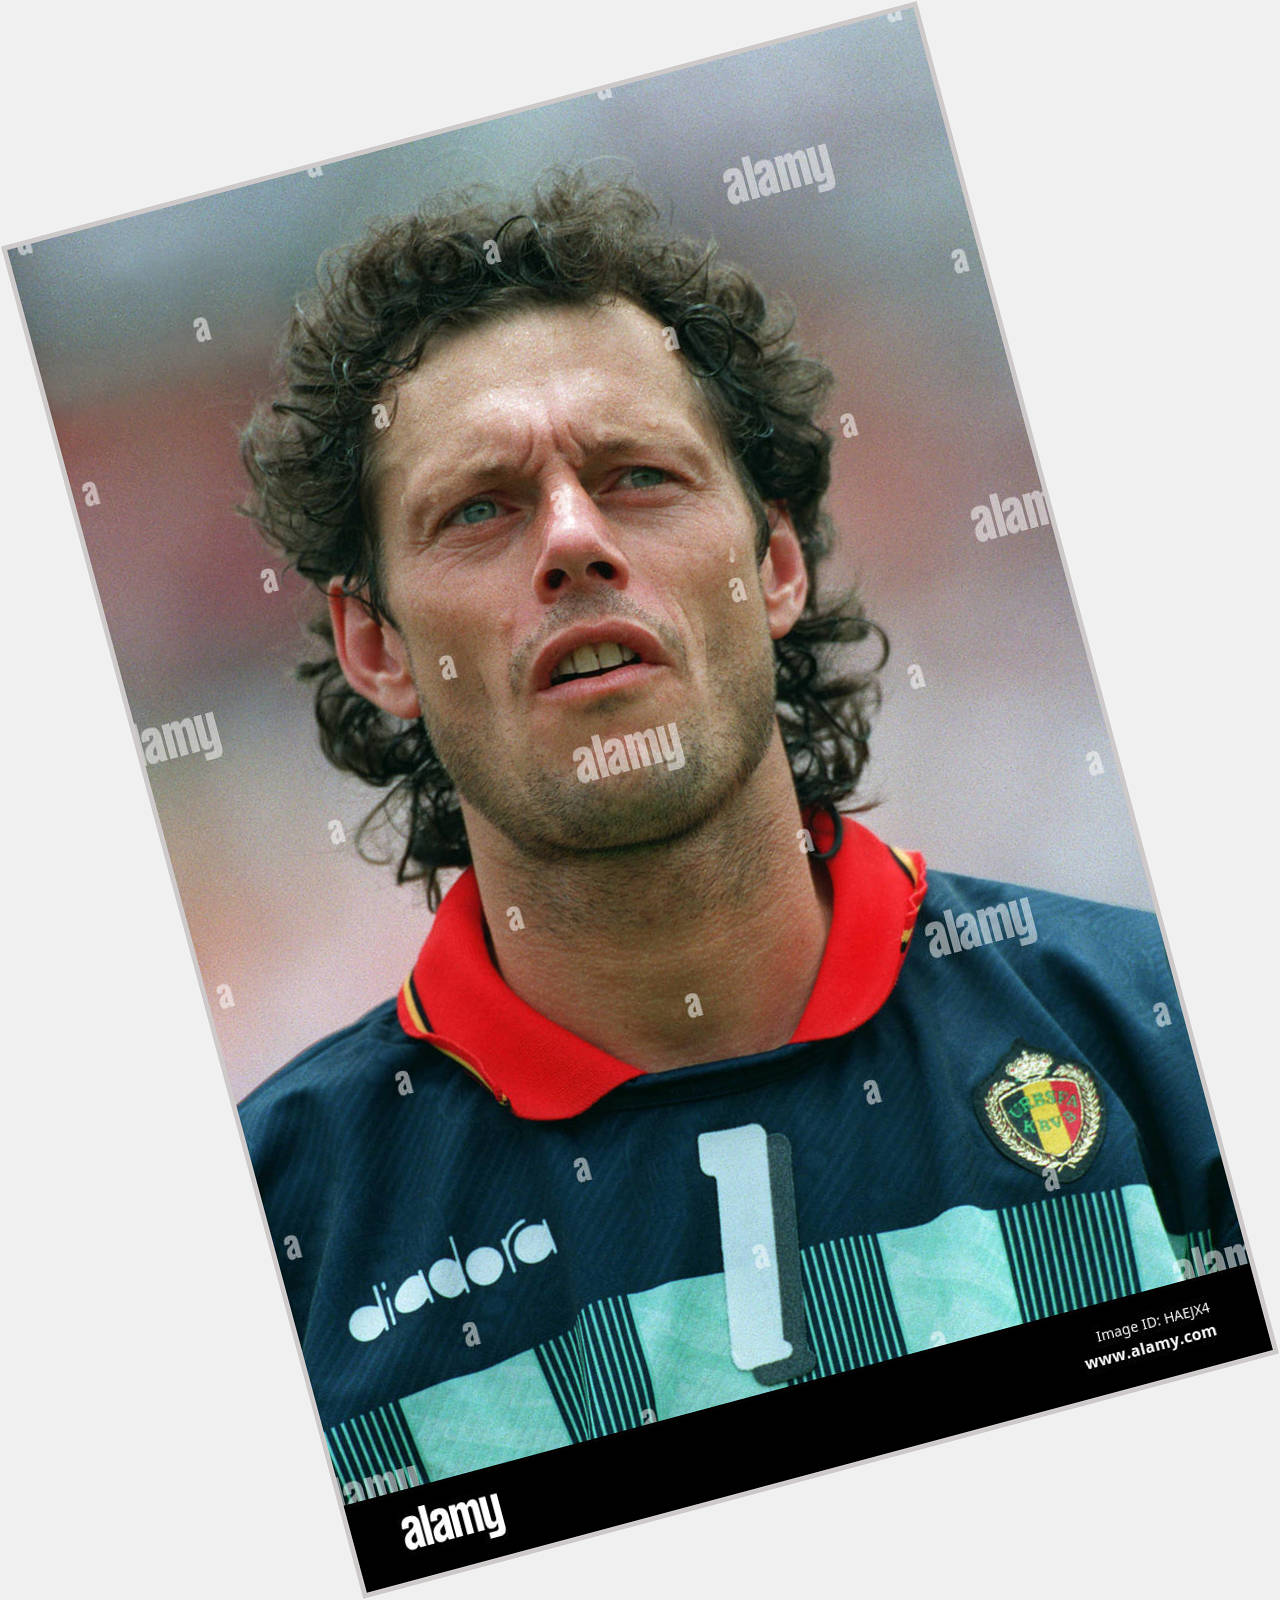 Michel Preud homme new pic 1